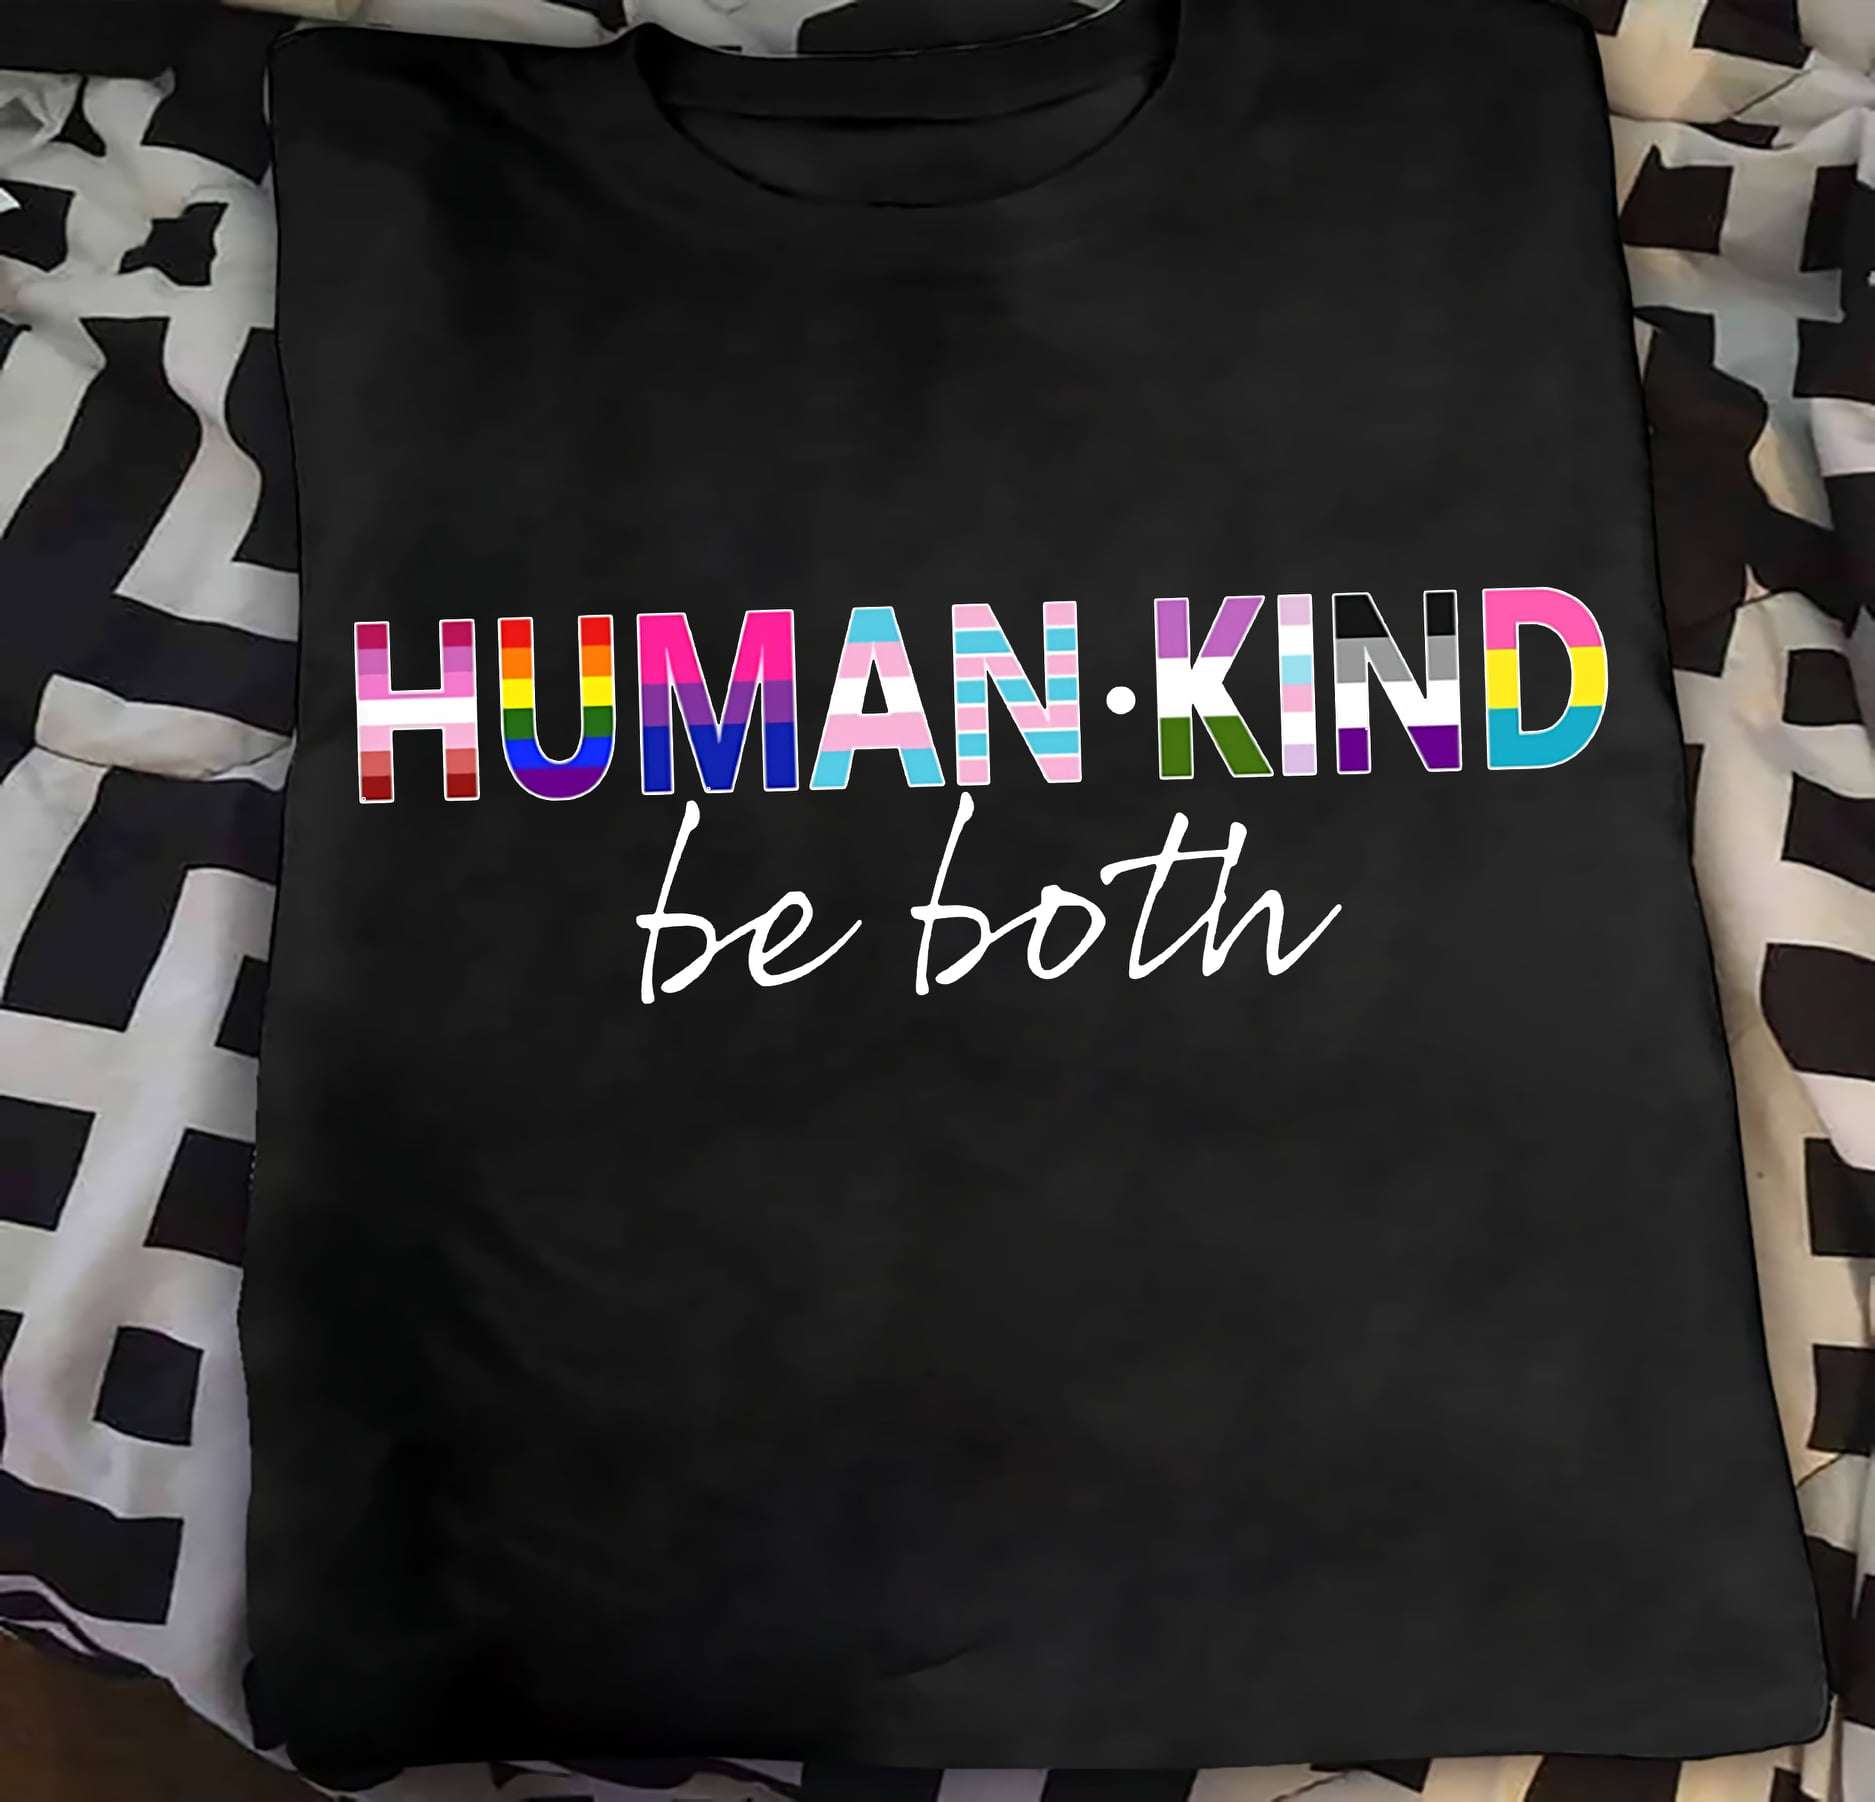 Human kind be both - Lgbt community, be kind in life